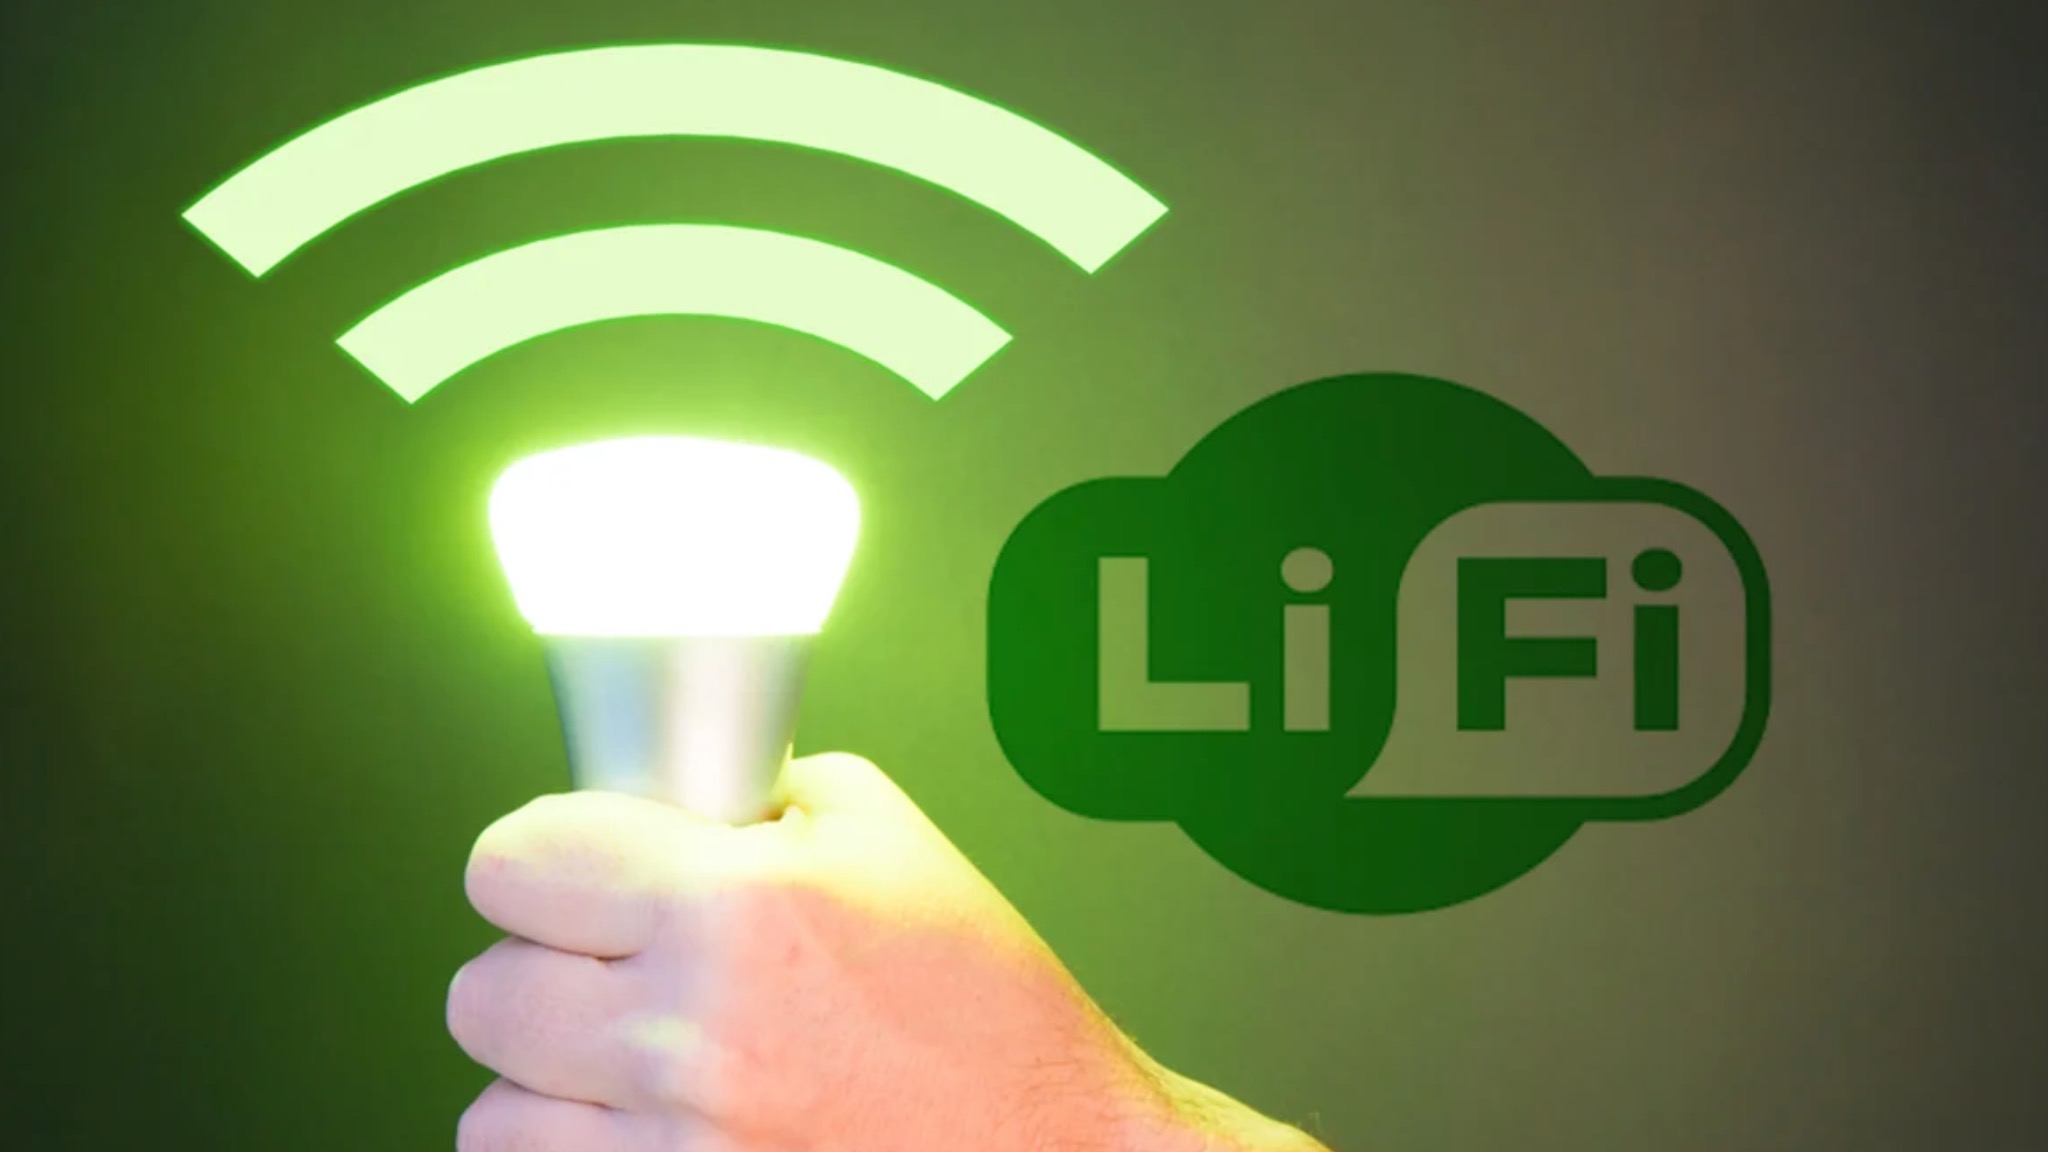 Here comes the internet that spreads through light bulbs